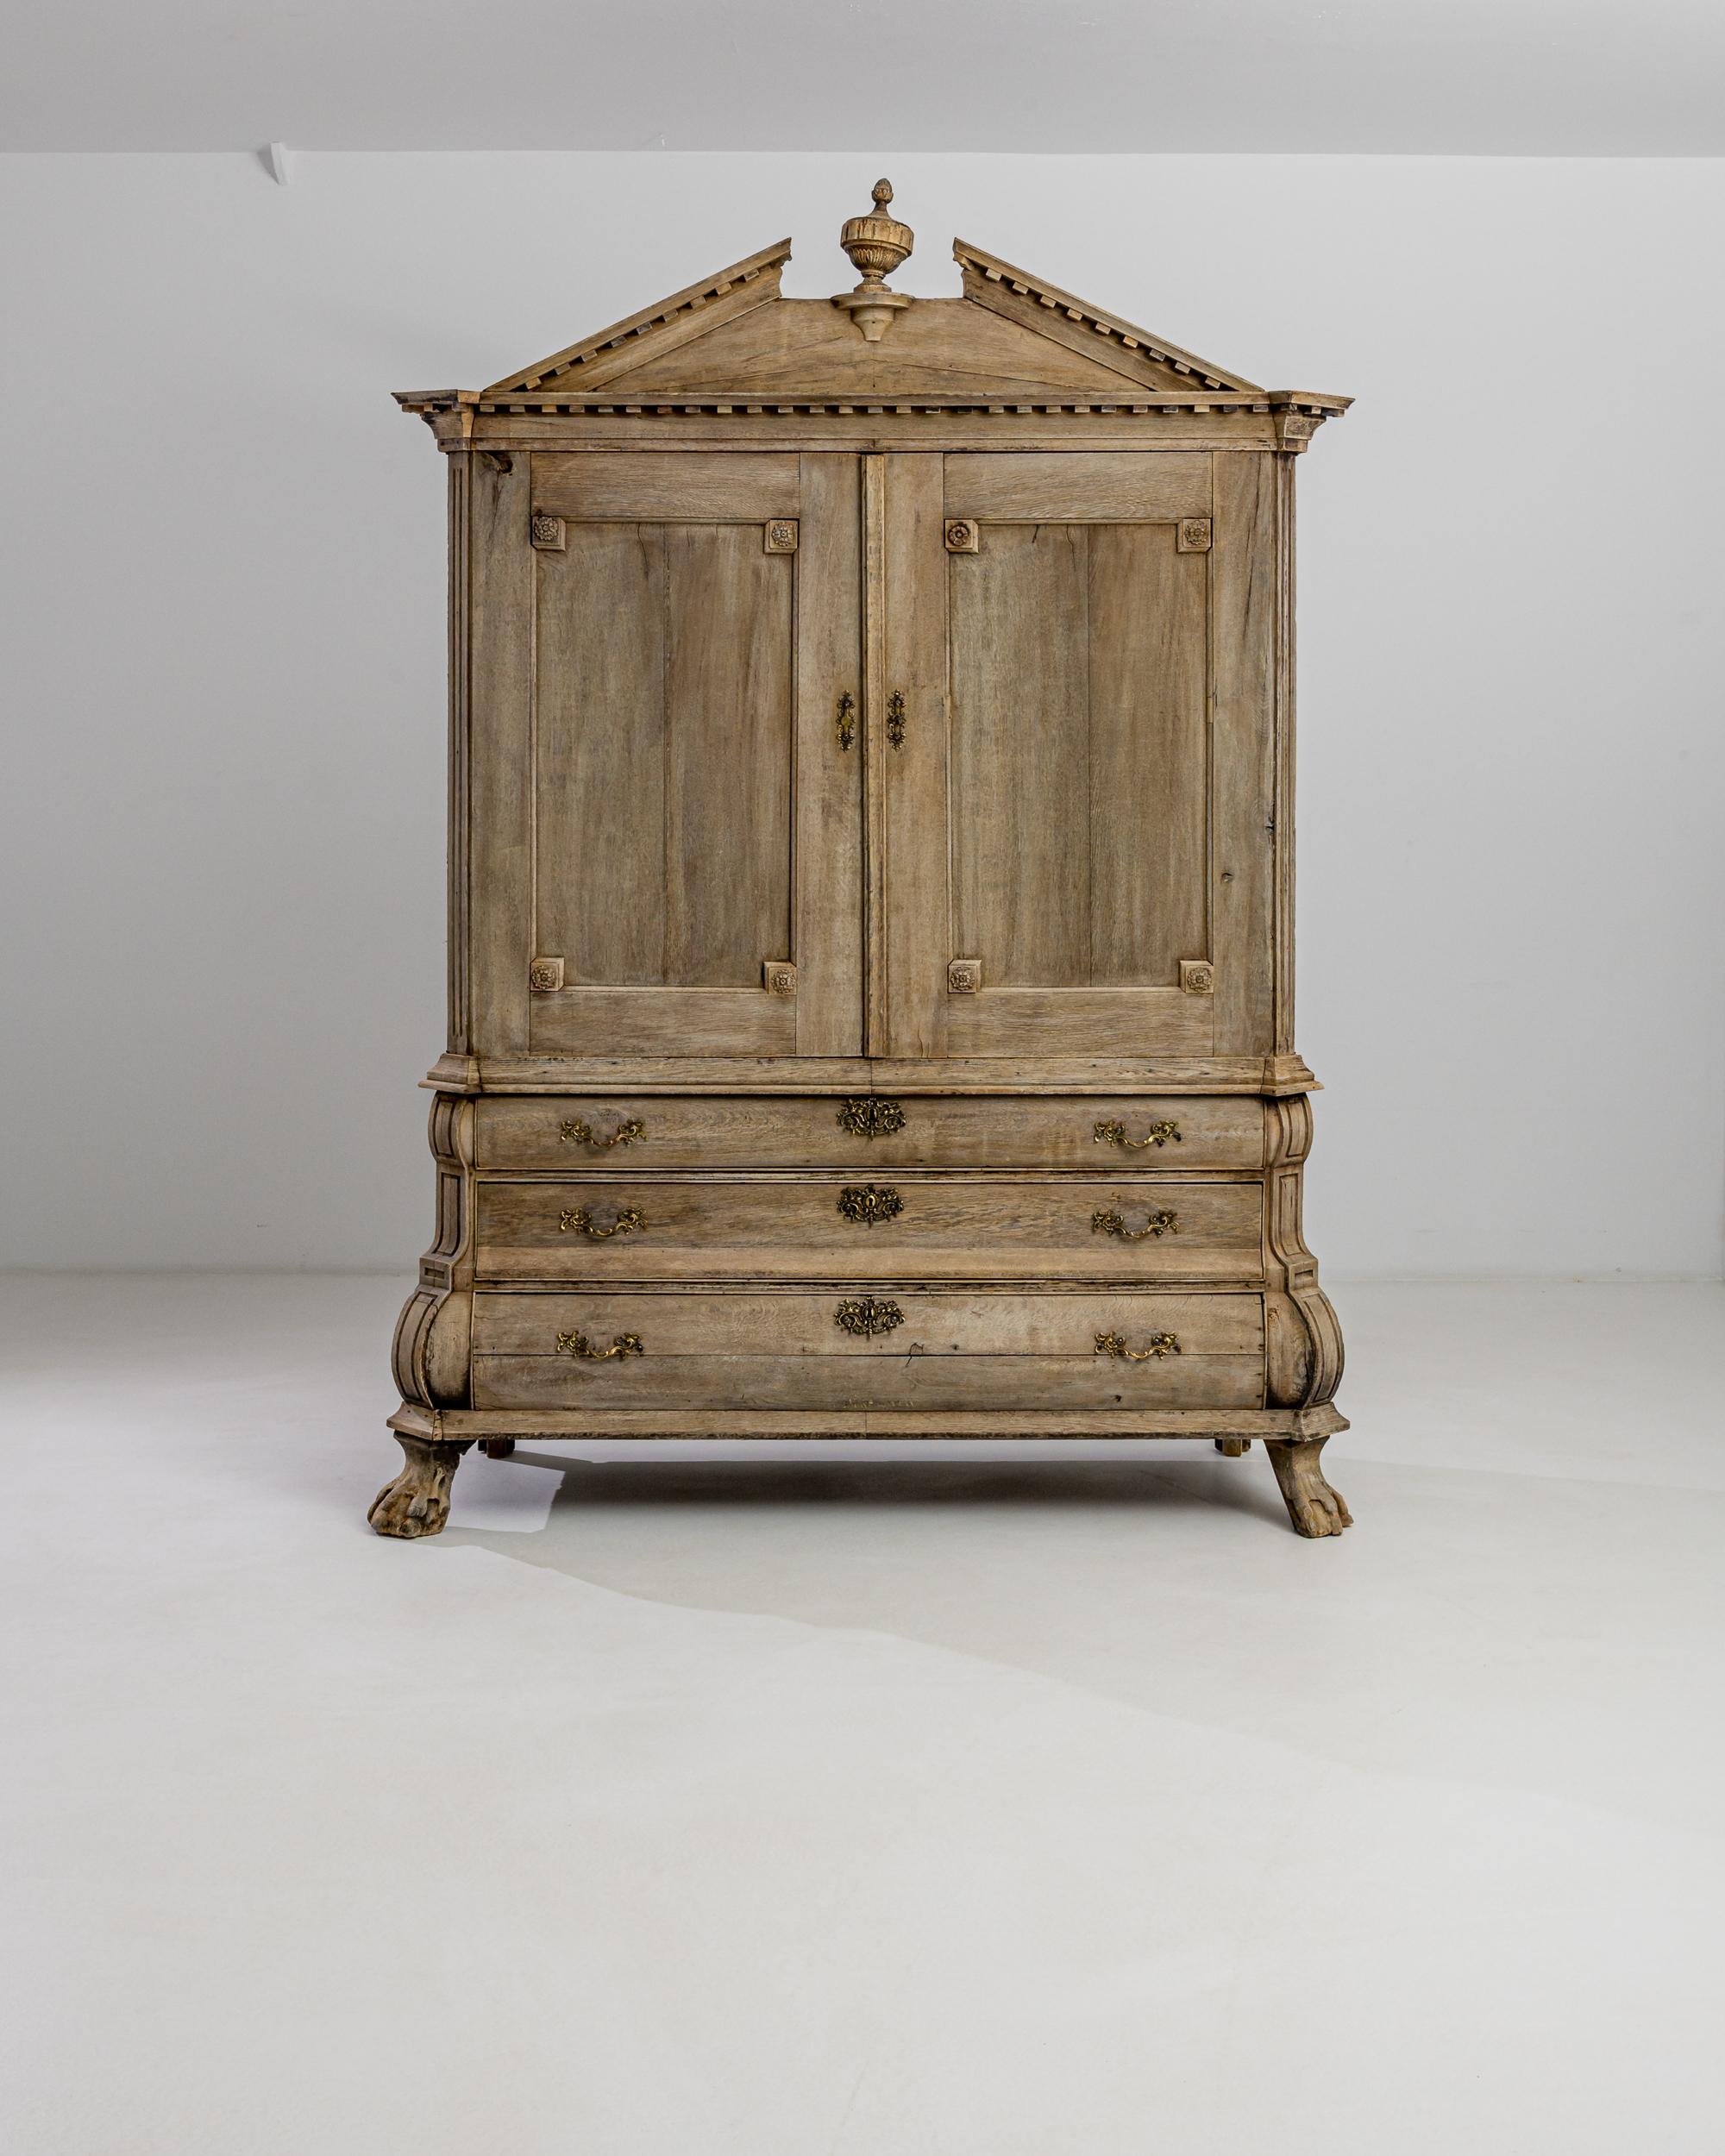 Hand-crafted in the Netherlands circa 1800, this impressive chest boasts an elaborate pediment with a carved cup crowing its top; an ample square-paneled torso and a bombe chest of drawers raised on claw feet. The eclectic combination of